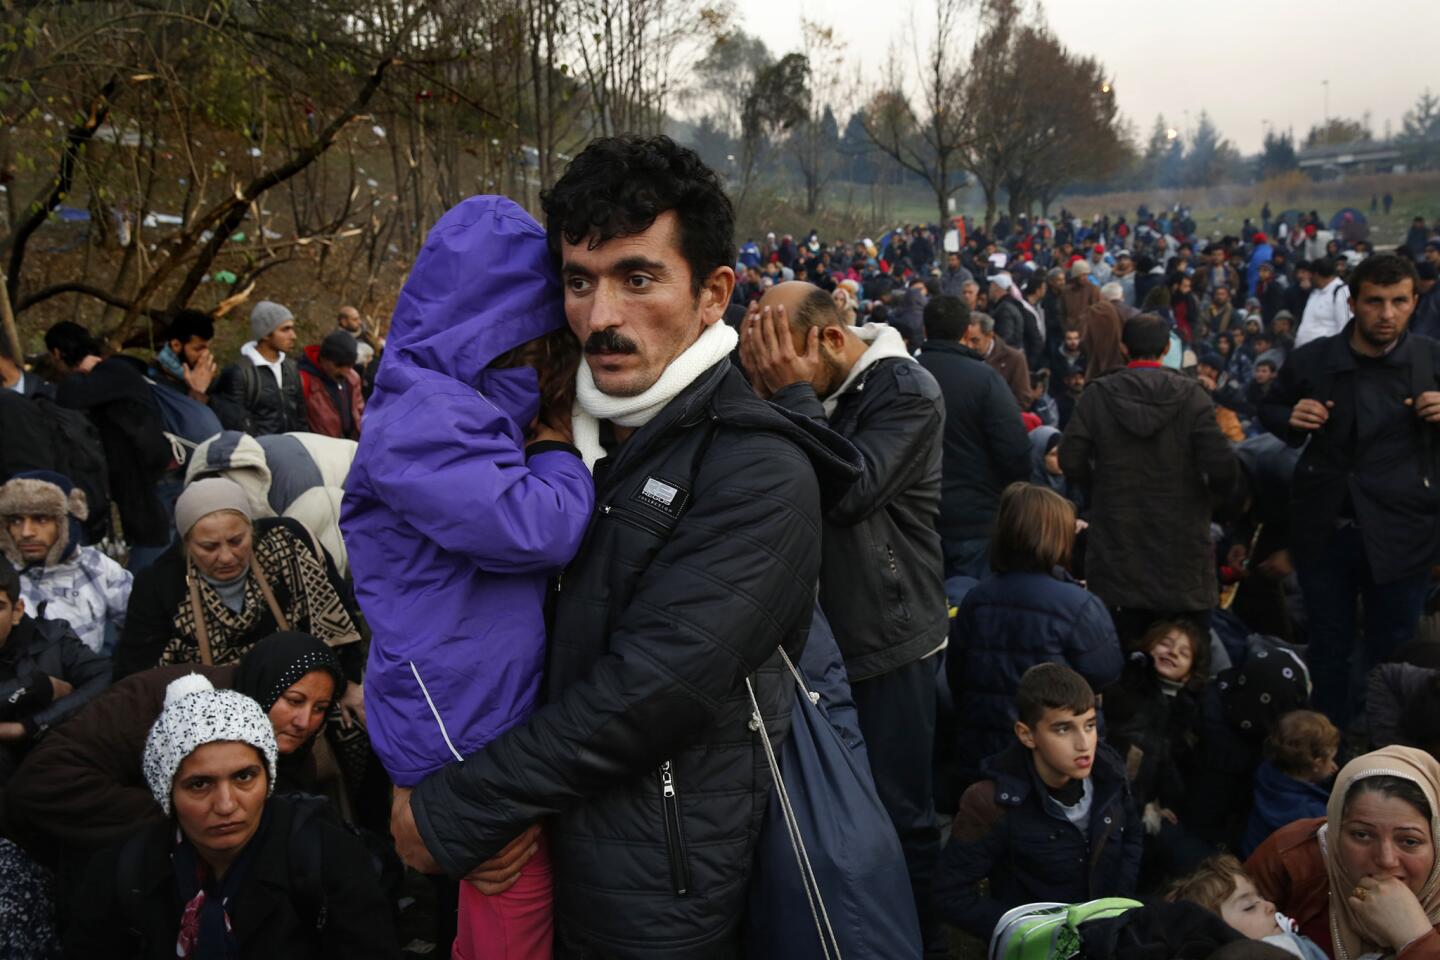 Omar Saman, of Iraq, holds his son Awyn, as he and his family wait to cross the border from Slovenia to Austria. Thousands of people push to get across the border into Austria from Slovenia where they were held up for days. Frustration is high as there is no food or water at this area between the two borders and no assistance for the thousands of families there.